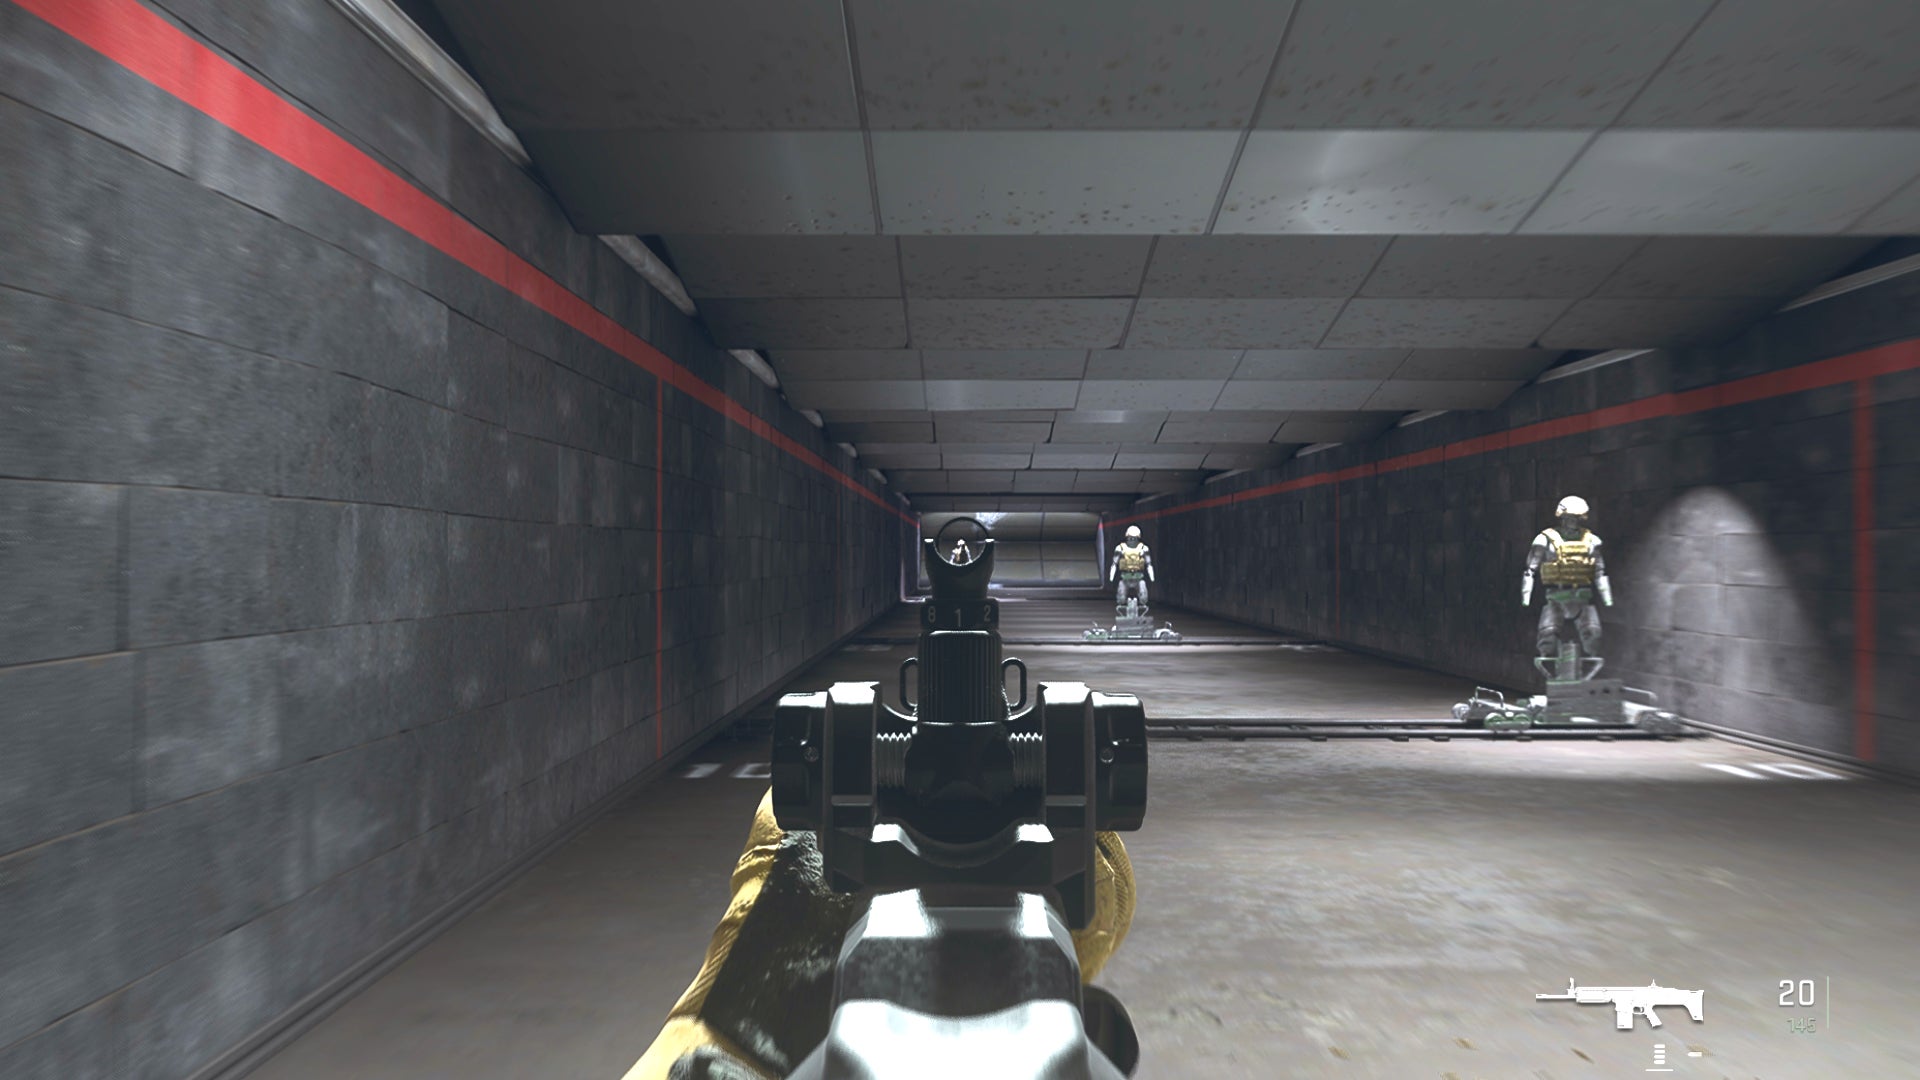 The player in Warzone 2.0 aims at a training dummy with the TAQ-V ironsights.